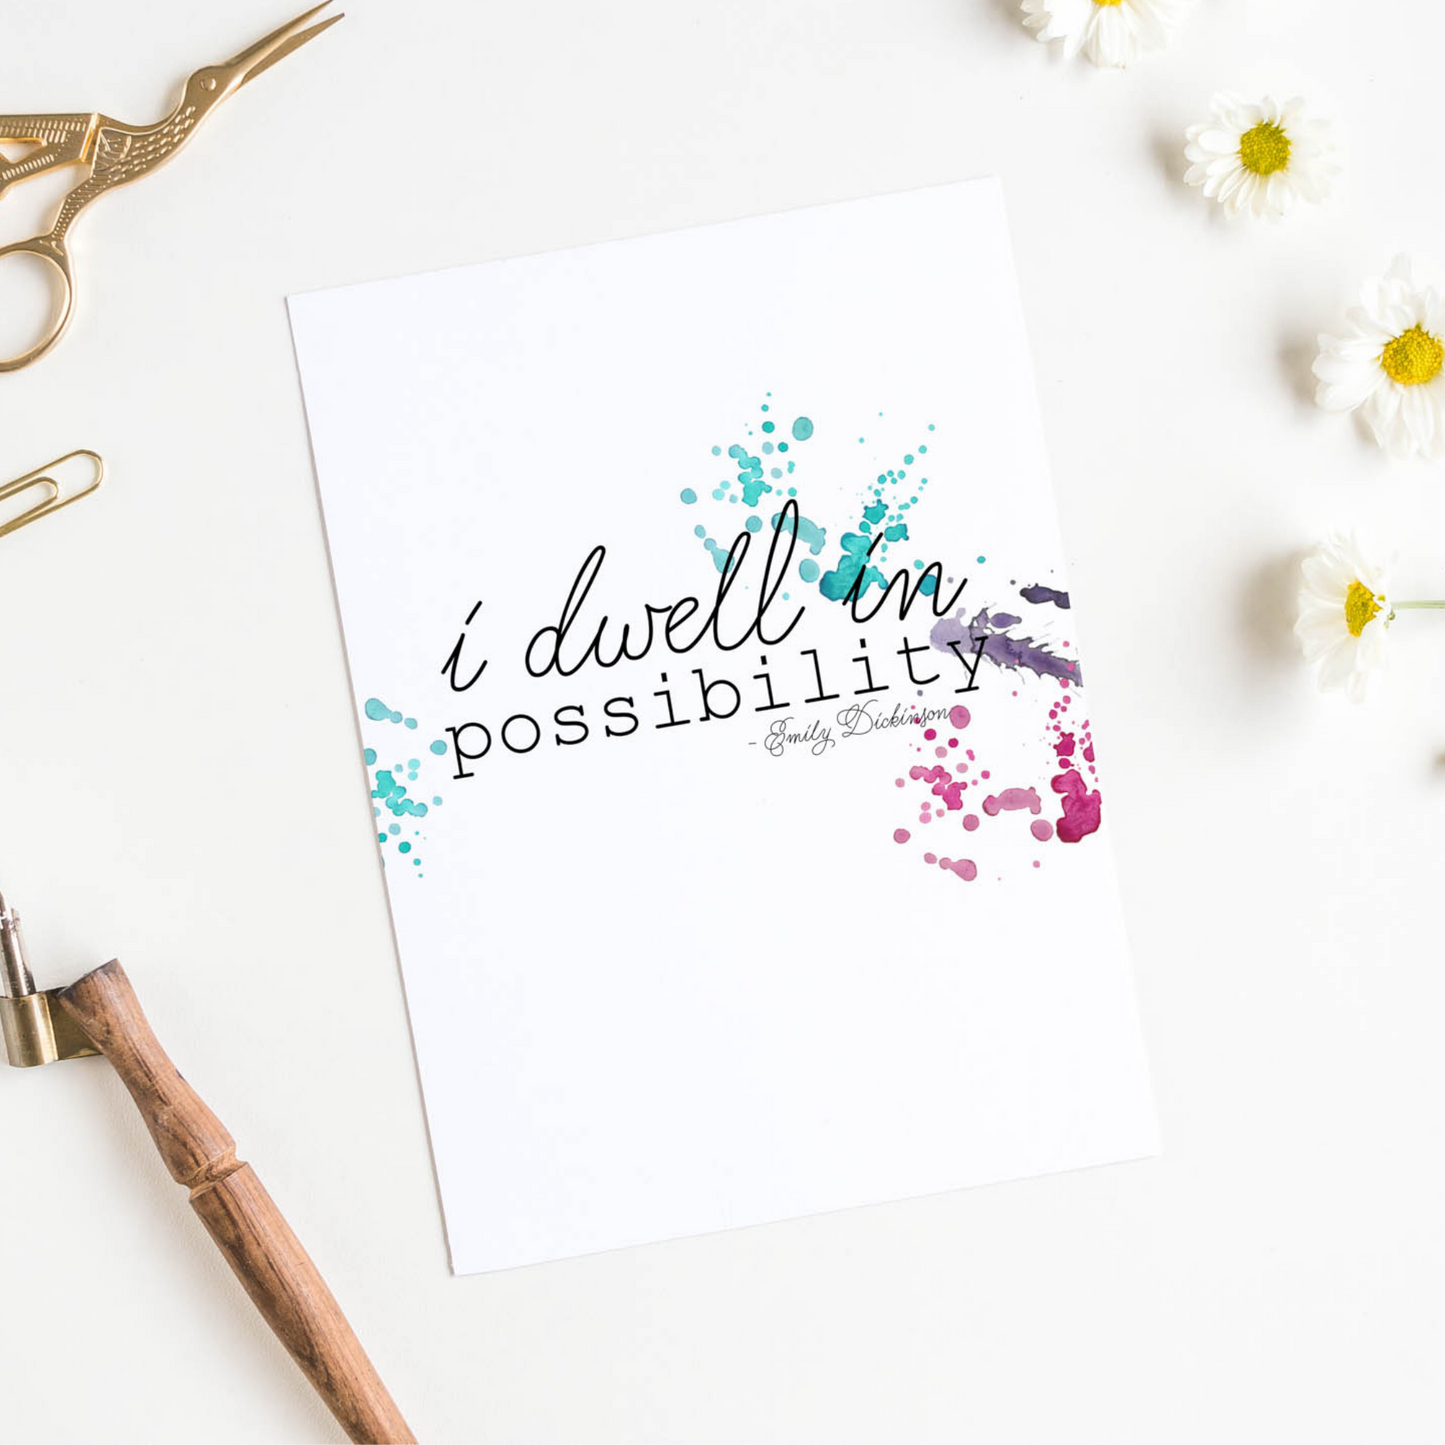 "I dwell in possibility" Quote by Emily Dickinson 8x10 Wall Art